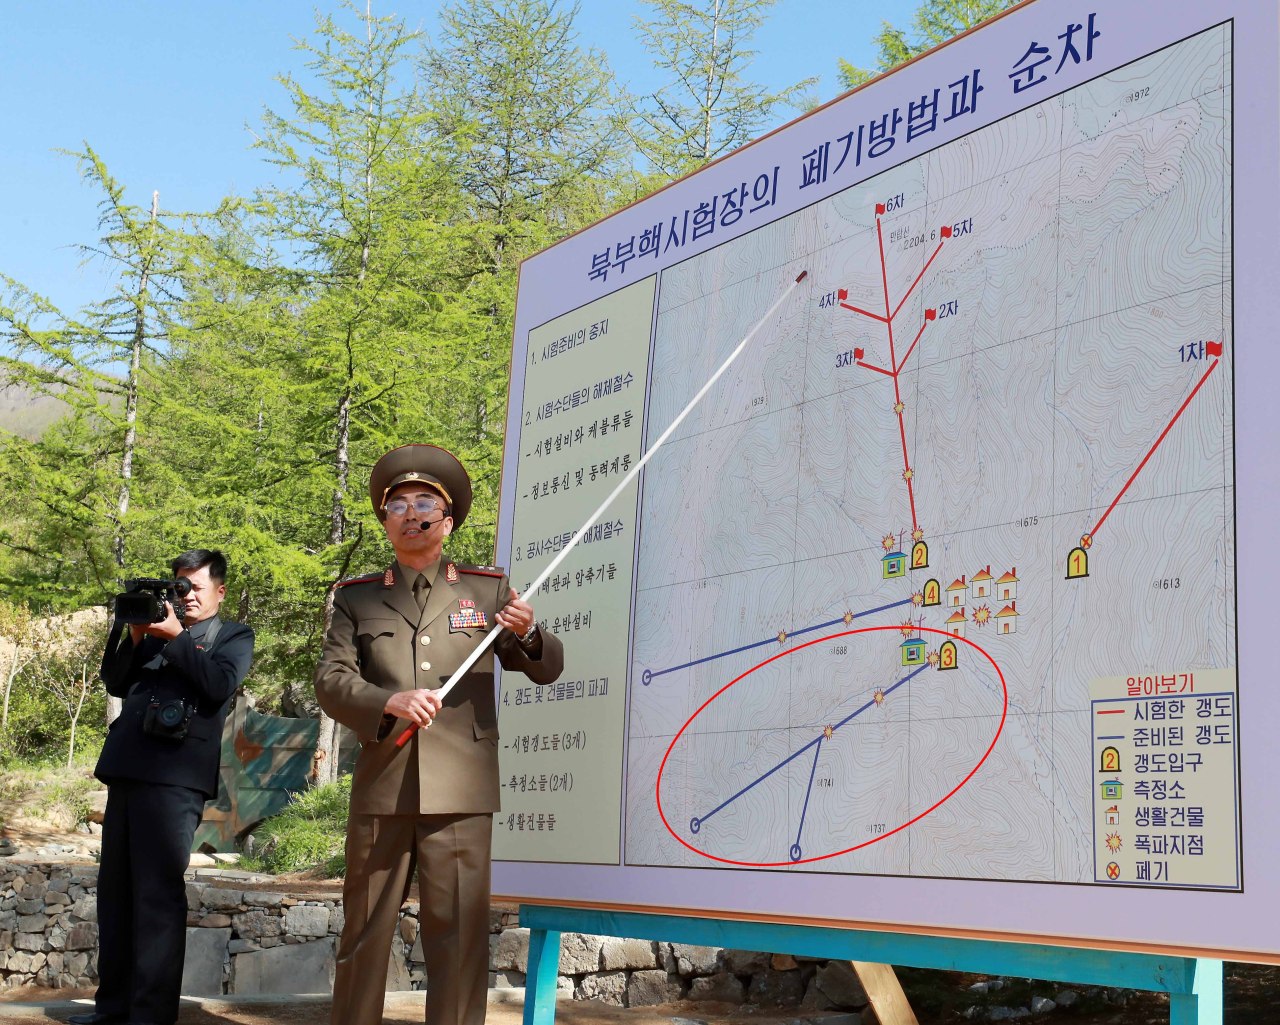 Kang Kyong-ho, deputy chief of North Korea‘s Nuclear Weapons Institute, explains the process of dismantling the Punggye-ri nuclear test site to foreign reporters on May 24, 2018. The circle shows Tunnel 3, or the South Portal, which North Korea has recently begun restoring. (Yonhap)